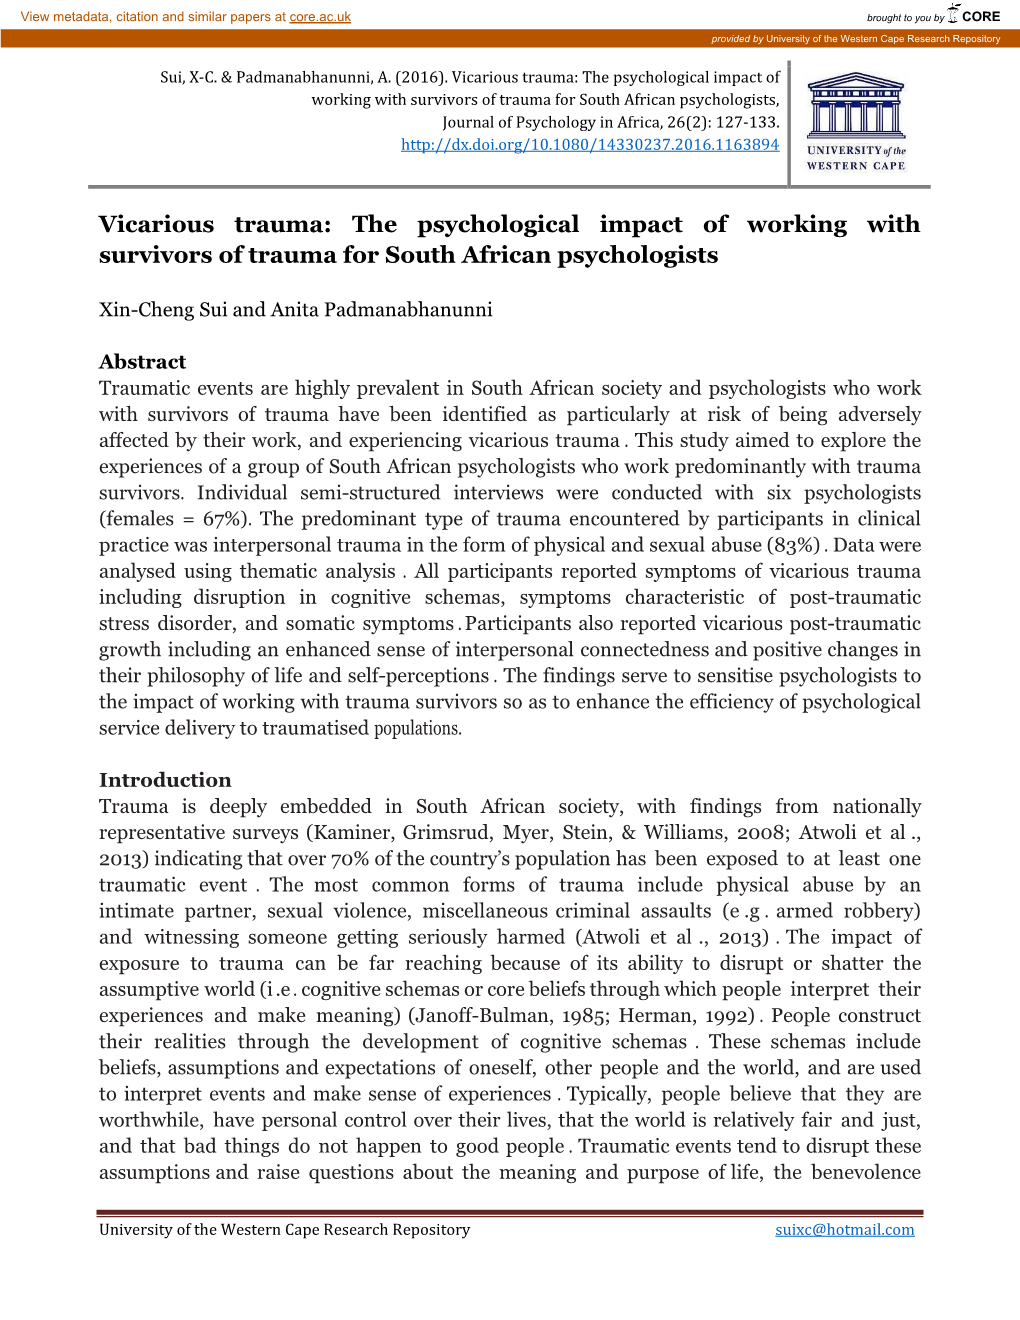 Vicarious Trauma: the Psychological Impact of Working with Survivors of Trauma for South African Psychologists, Journal of Psychology in Africa, 26(2): 127-133